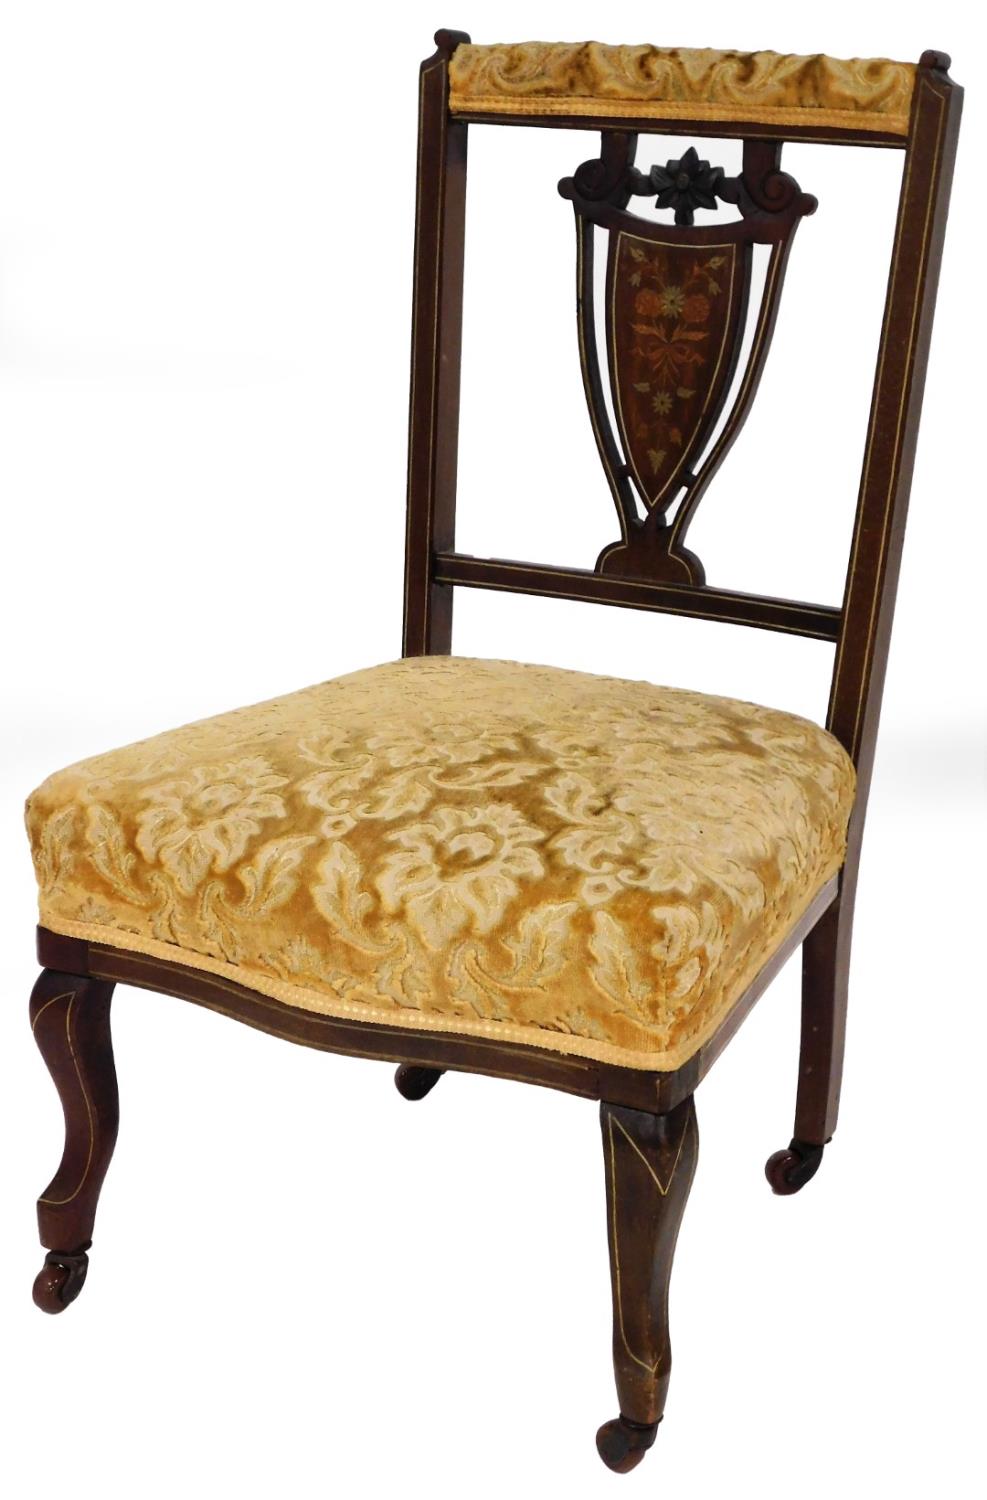 An Edwardian bedroom chair, with shield marquetry inlaid back, on gold upholstered seat, in shaped